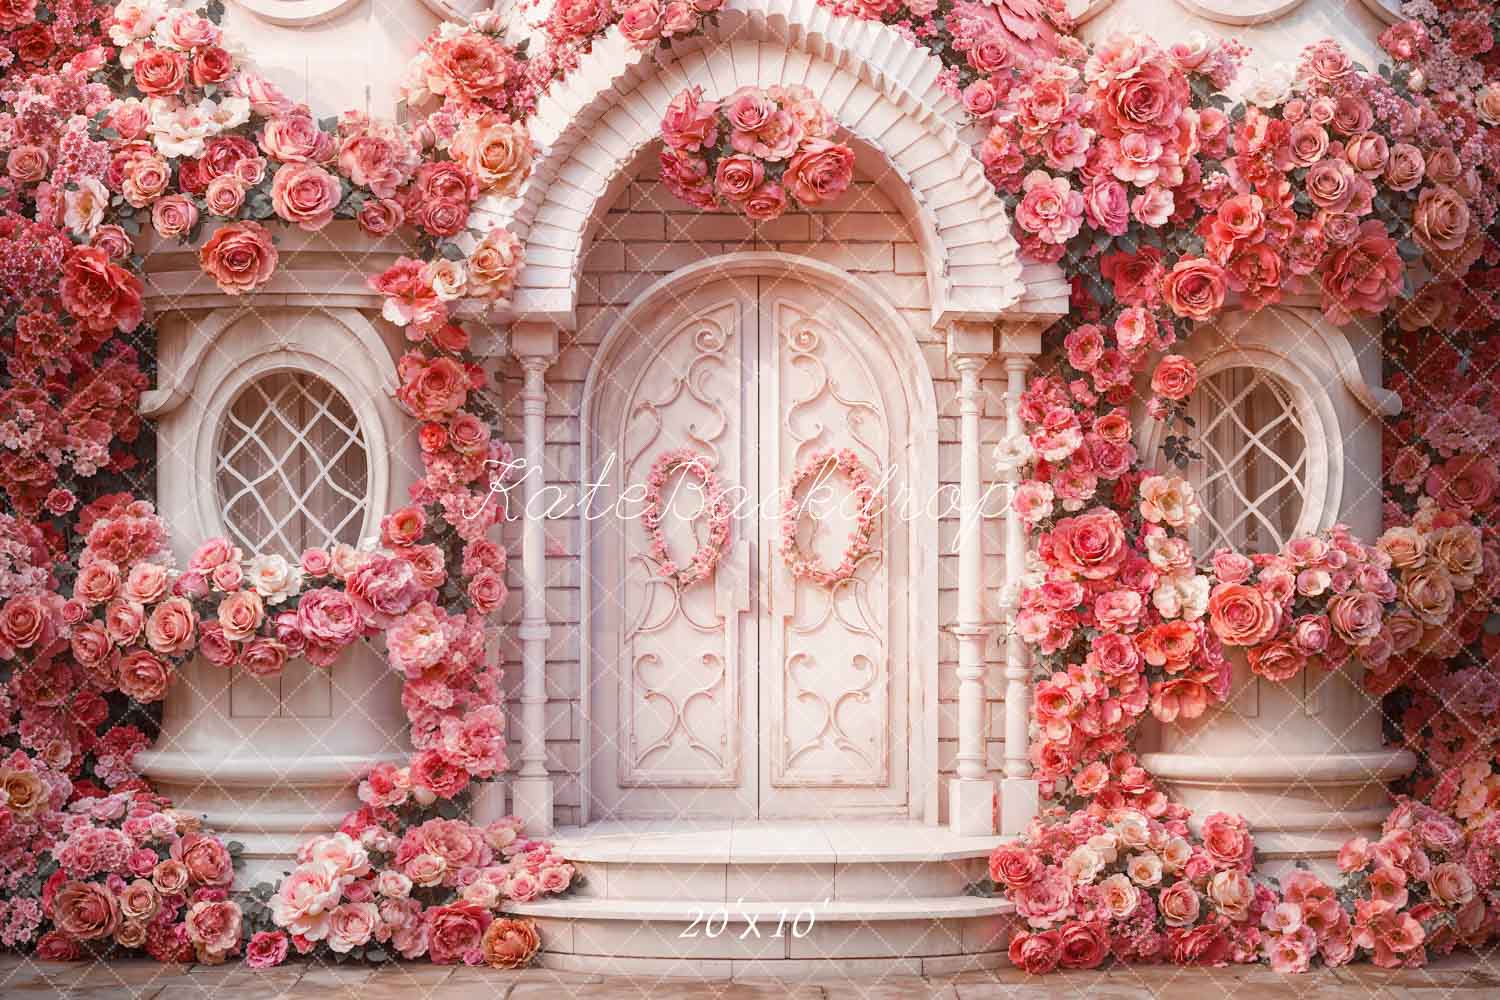 Kate Valentine's Day Pink Flowers House Backdrop Designed by Emetselch